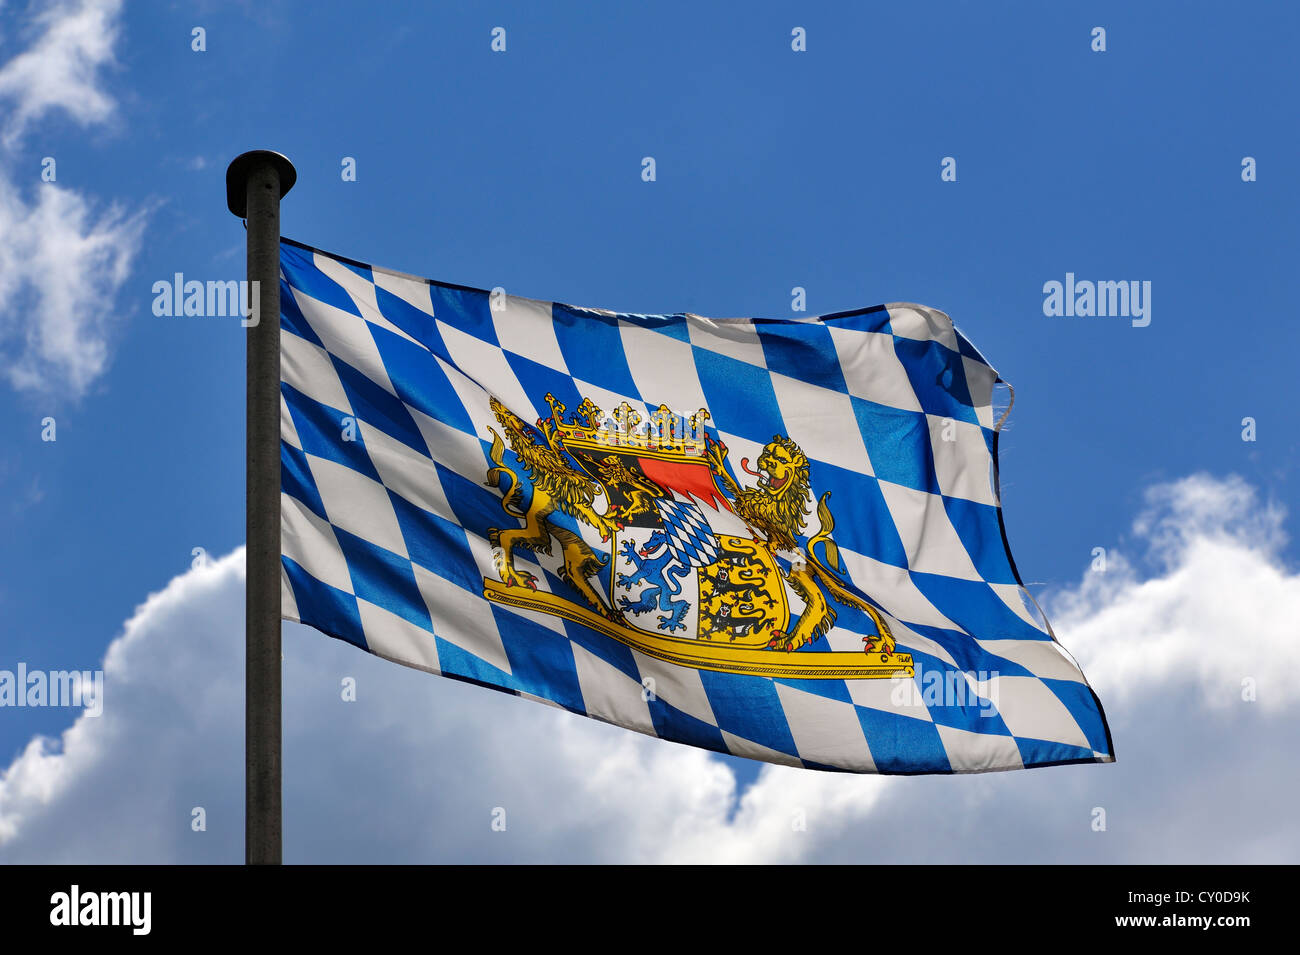 Bavarian flag flying in front of a blue sky with clouds, Hintersee, Upper Bavaria, Bavaria Stock Photo